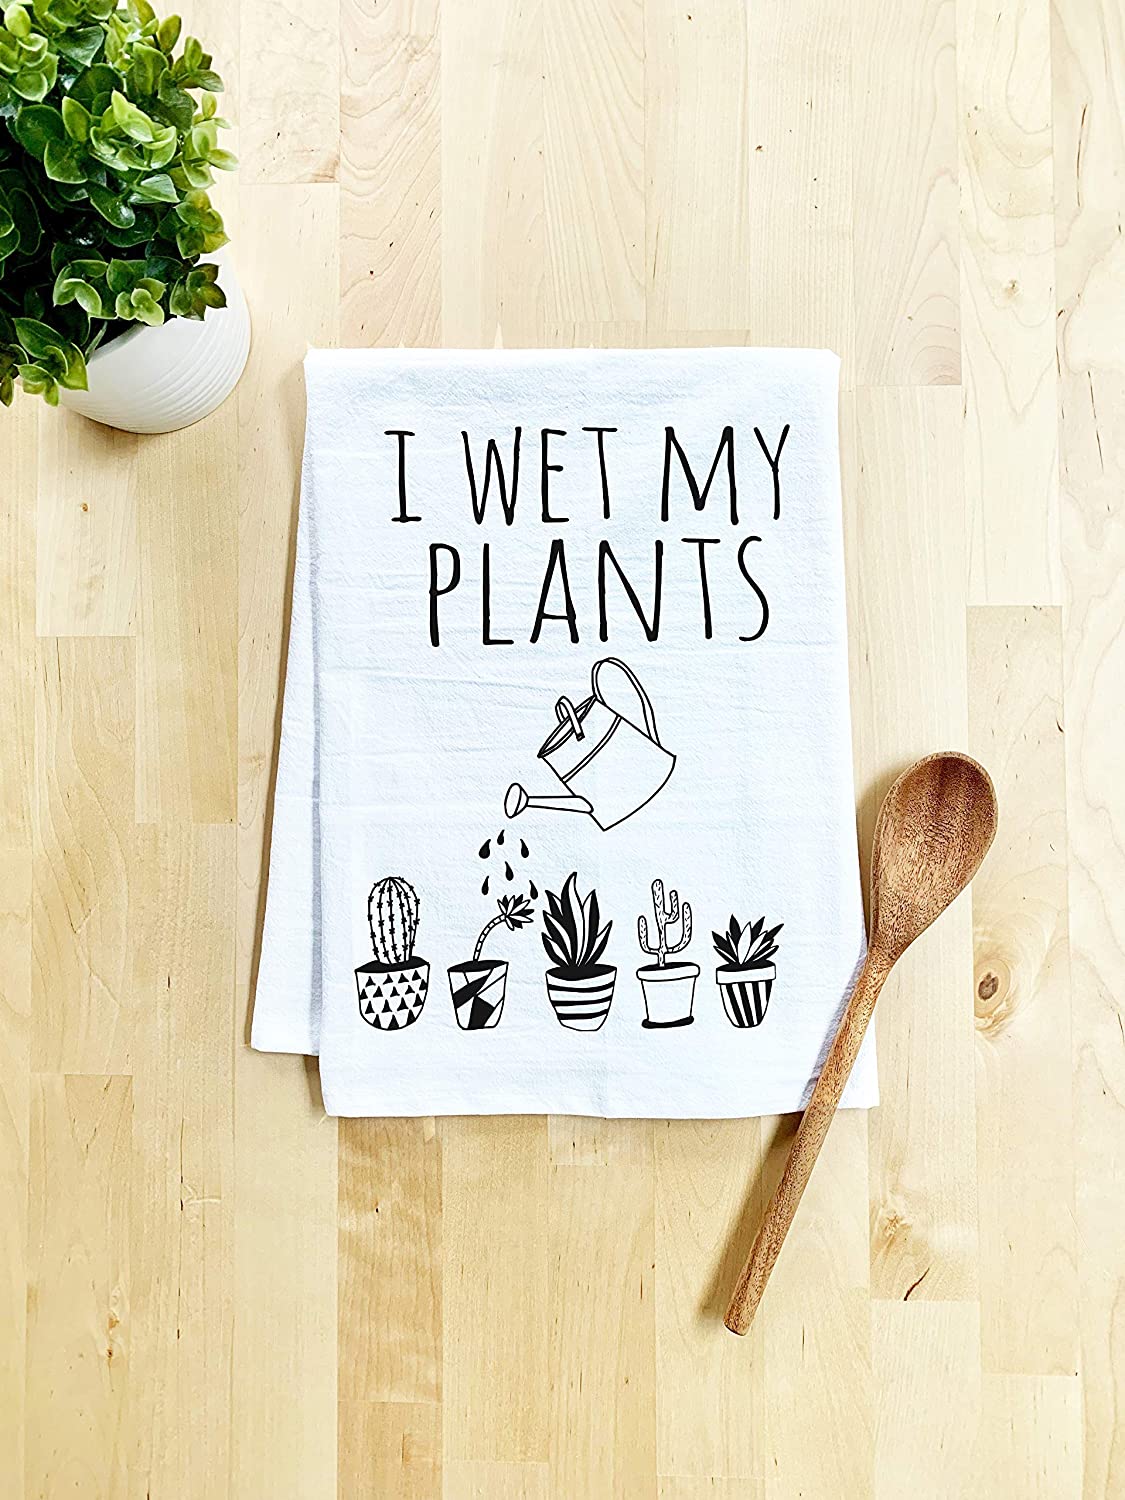 https://www.wideopencountry.com/wp-content/uploads/sites/4/eats/2021/03/Funny-Kitchen-Towel-I-Wet-My-Plants-Flour-Sack-Dish-Towel-Sweet-Housewarming-Gift-White-.jpg?resize=1125%2C1500